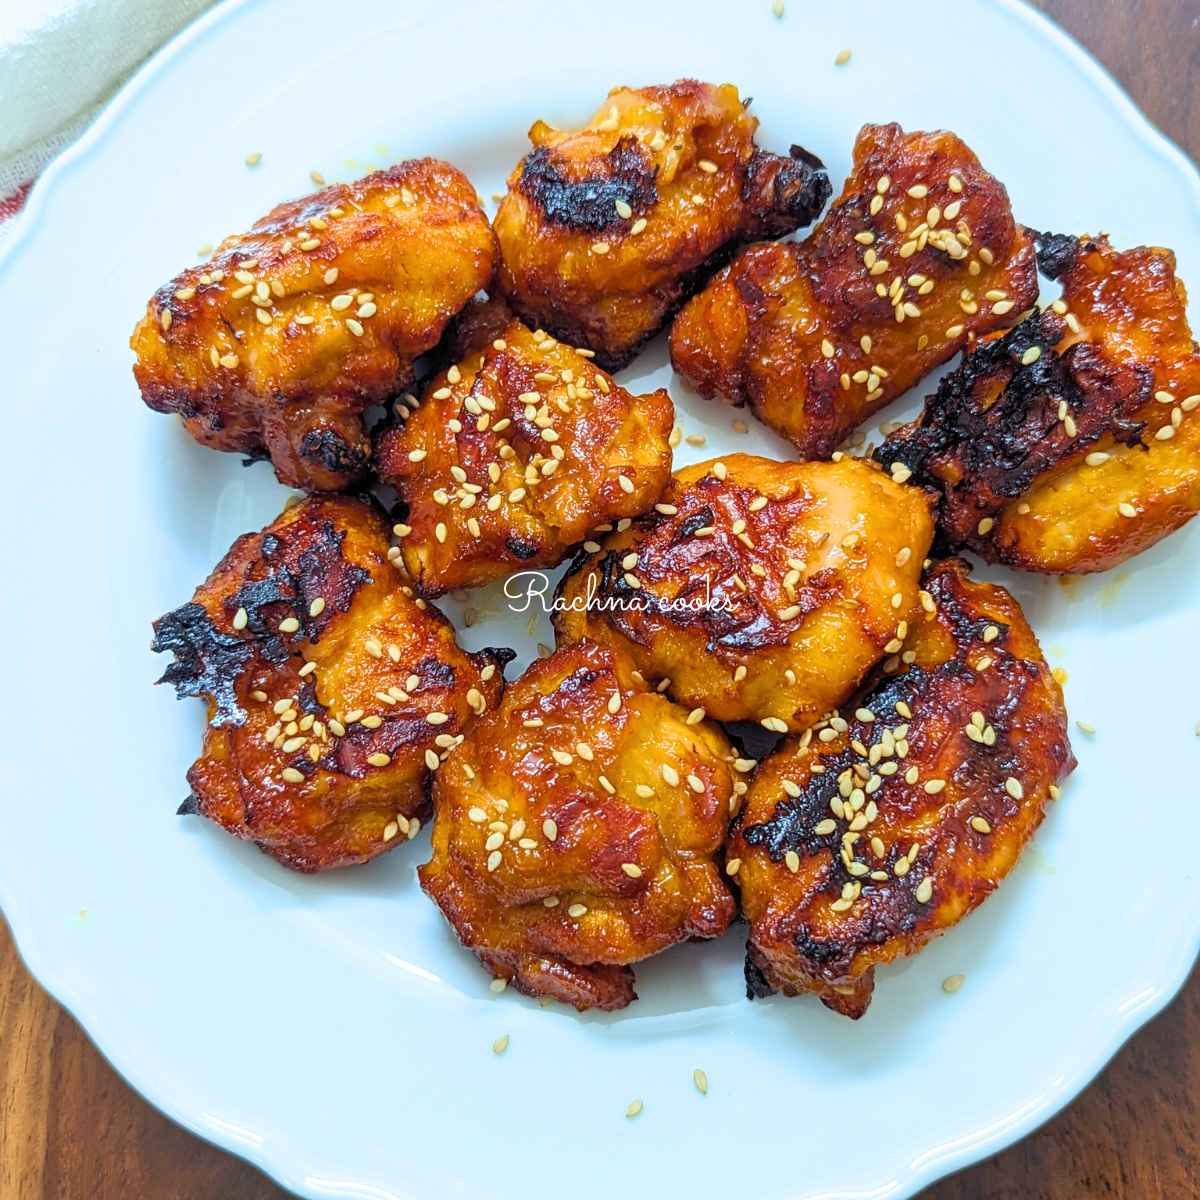 Air fried teriyaki chicken served on a white plate.